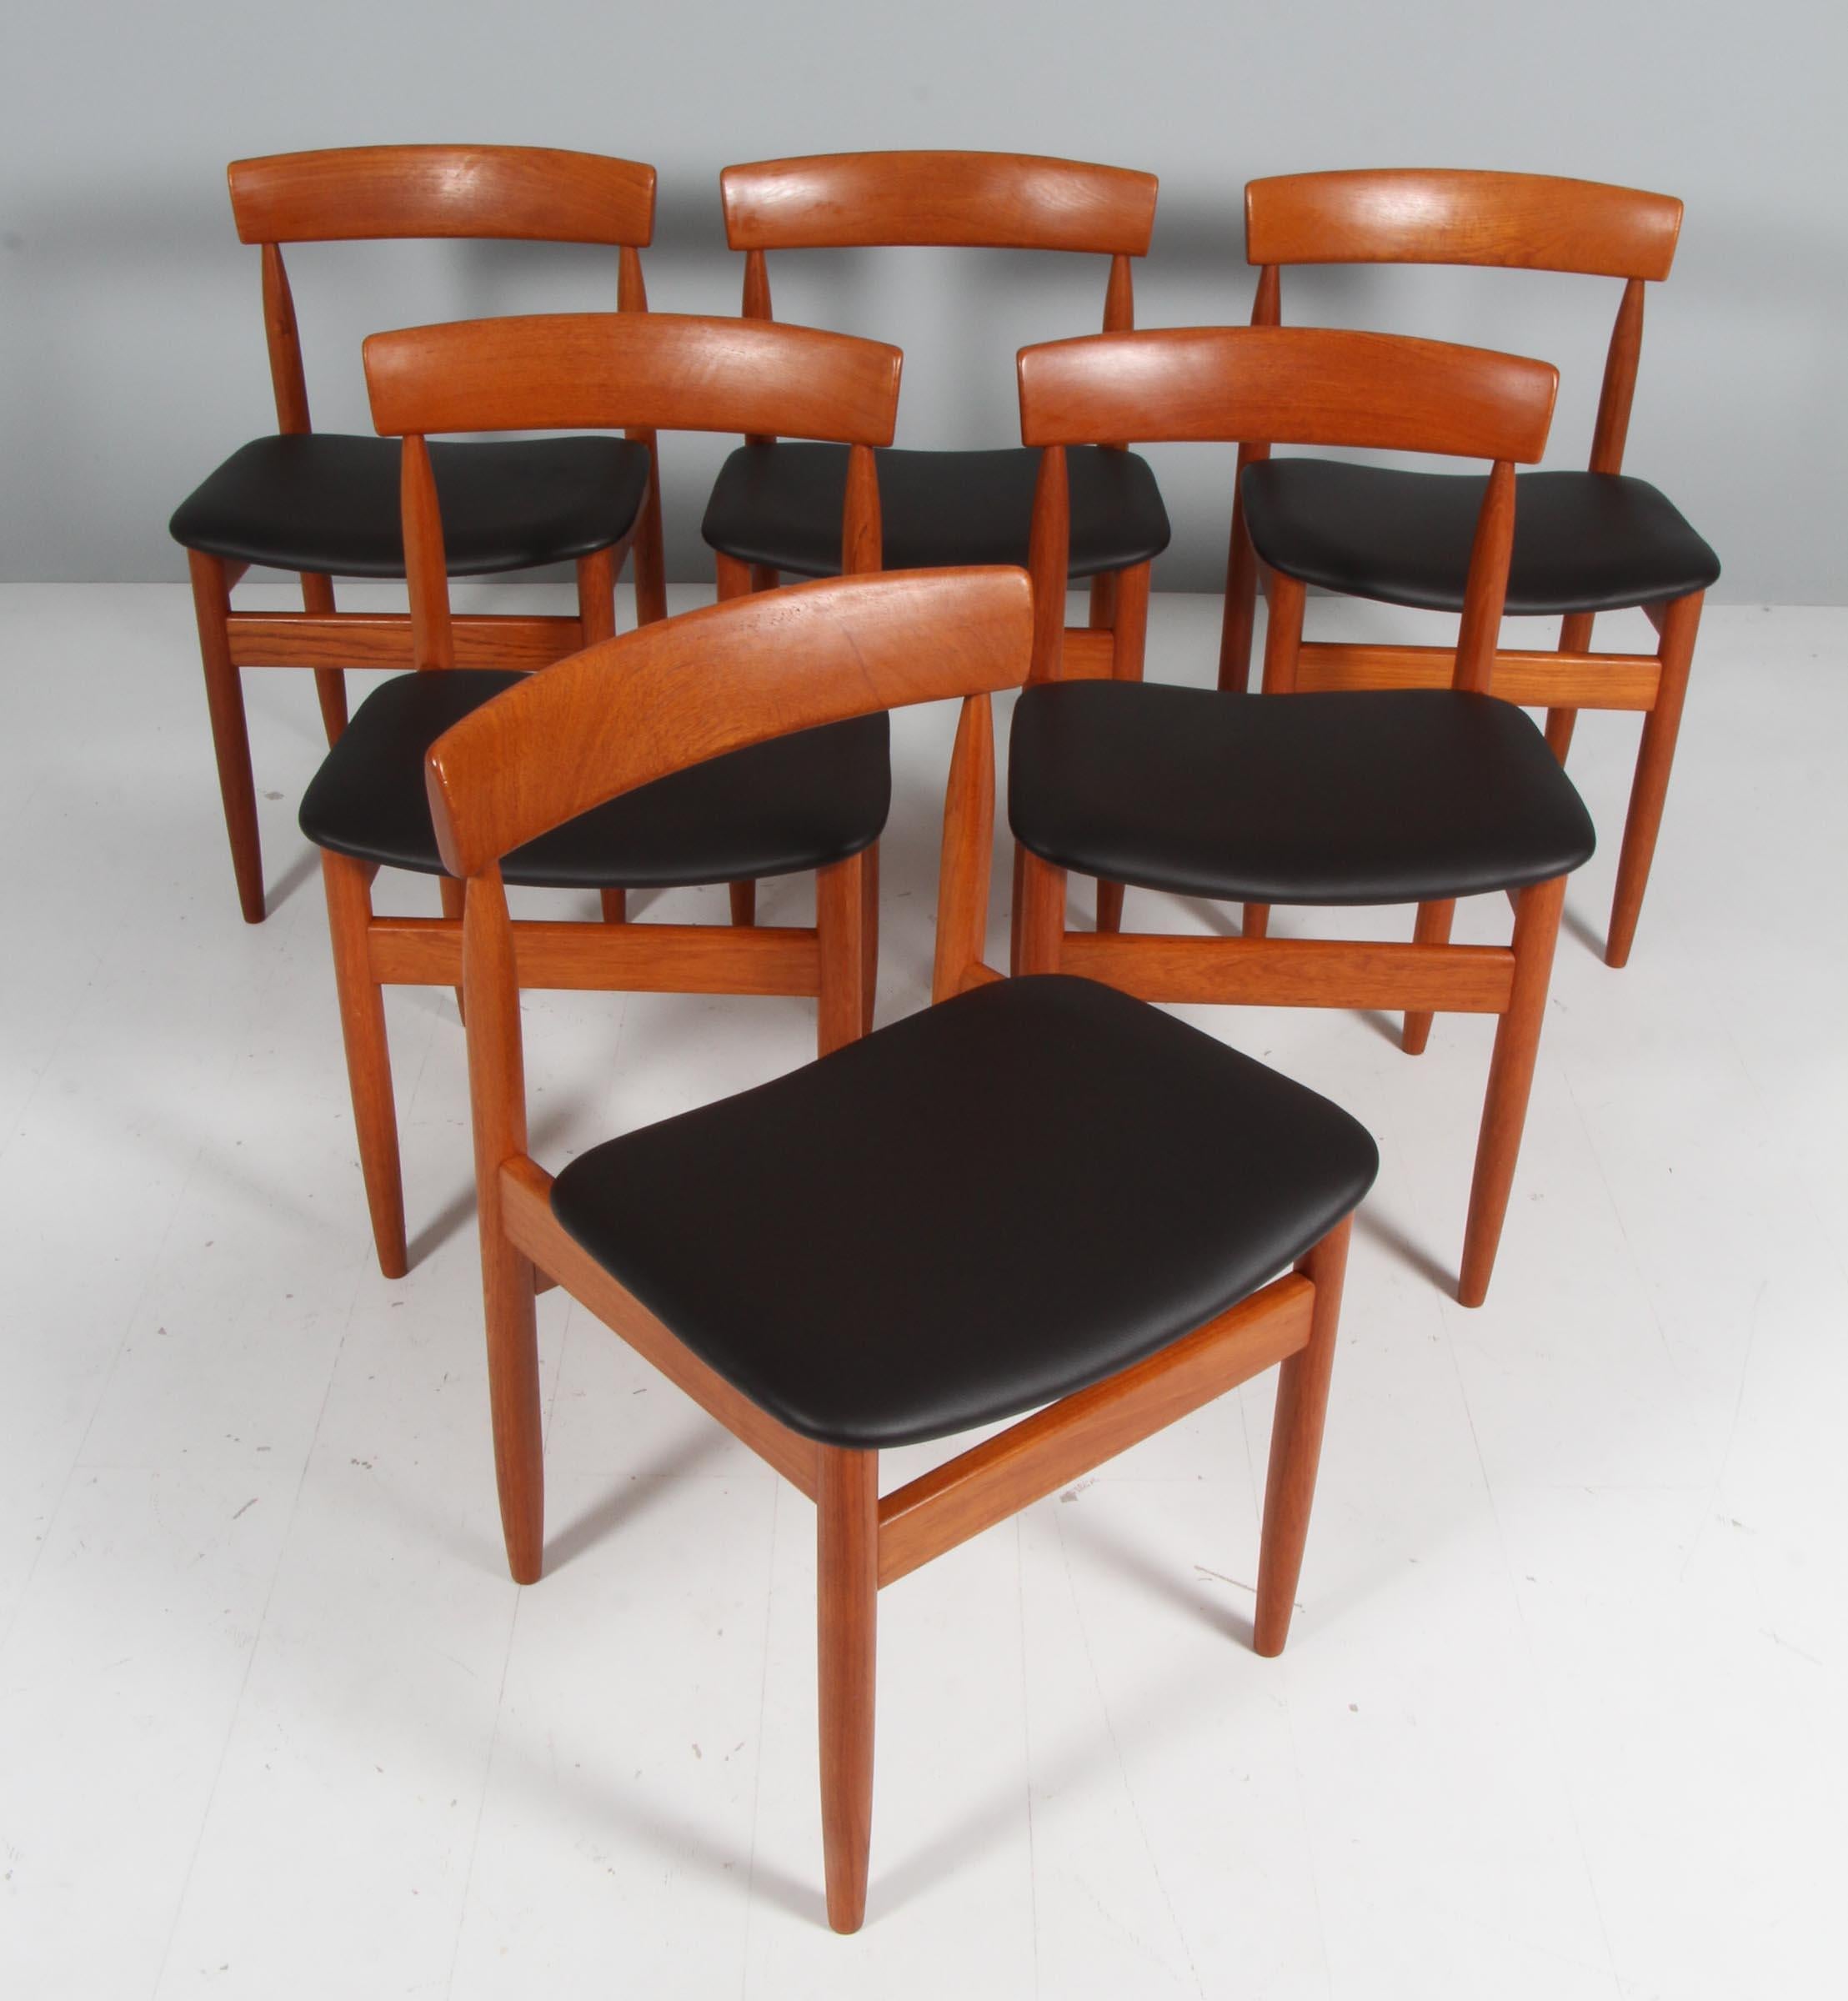 Farsø Stolefabrik set of six dining chairs in solid teak. New upholstered with dark brown Savanne leather from Arne Sørensen.

Made in Denmark in the 1960s